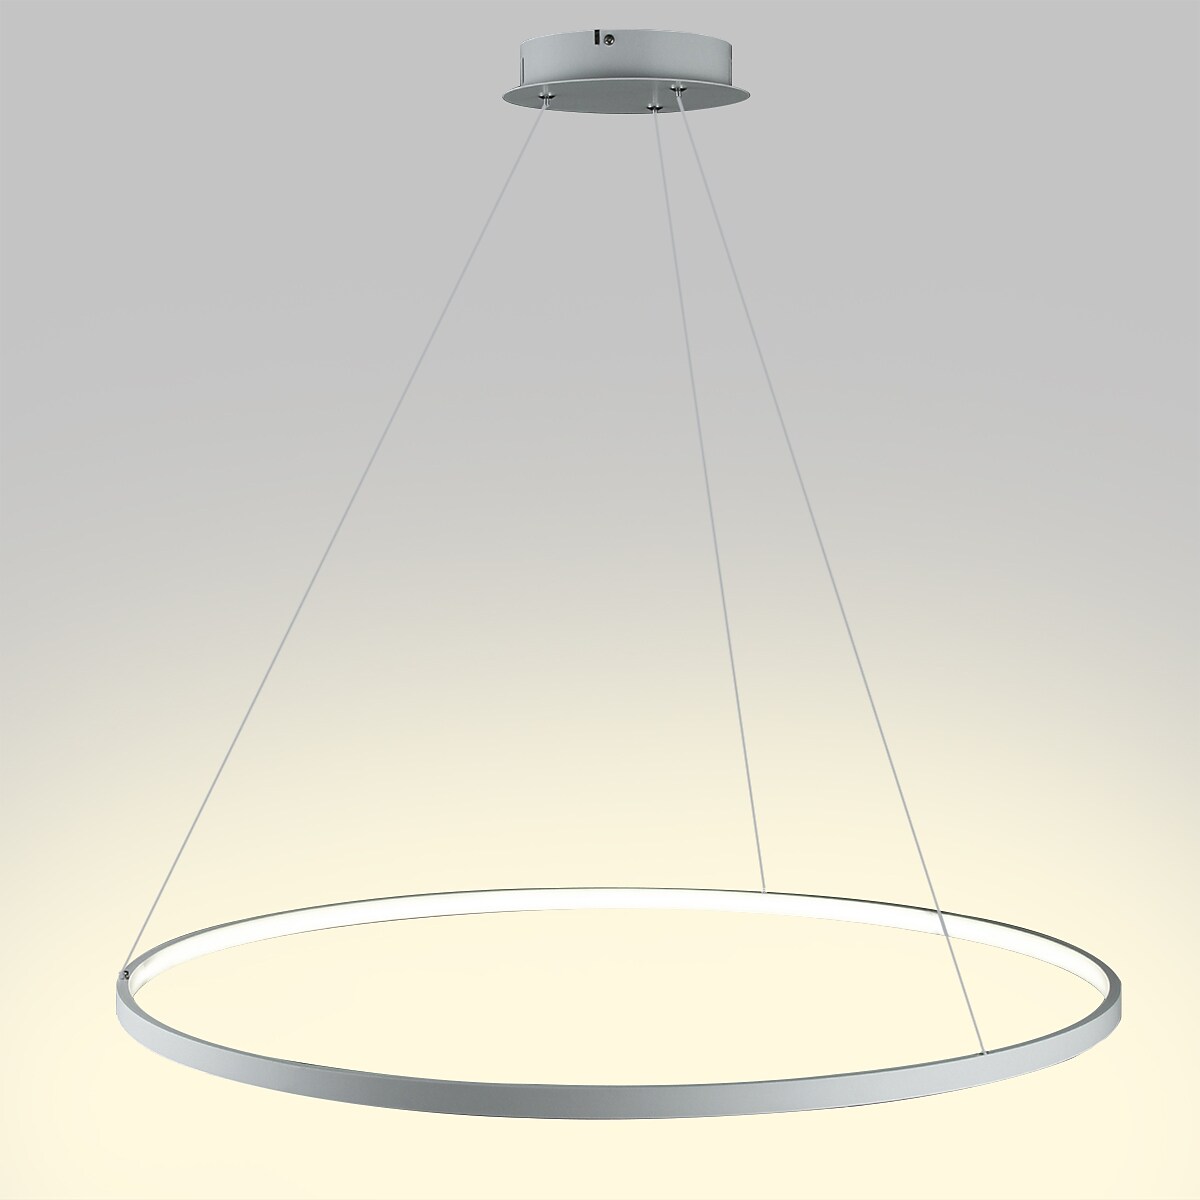 60 80 cm Circle Design Unique Design Pendant Light Metal Painted Finishes Contemporary Modern 110-120V 220-240V ONLY DIMMABLE WITH REMOTE CONTROL